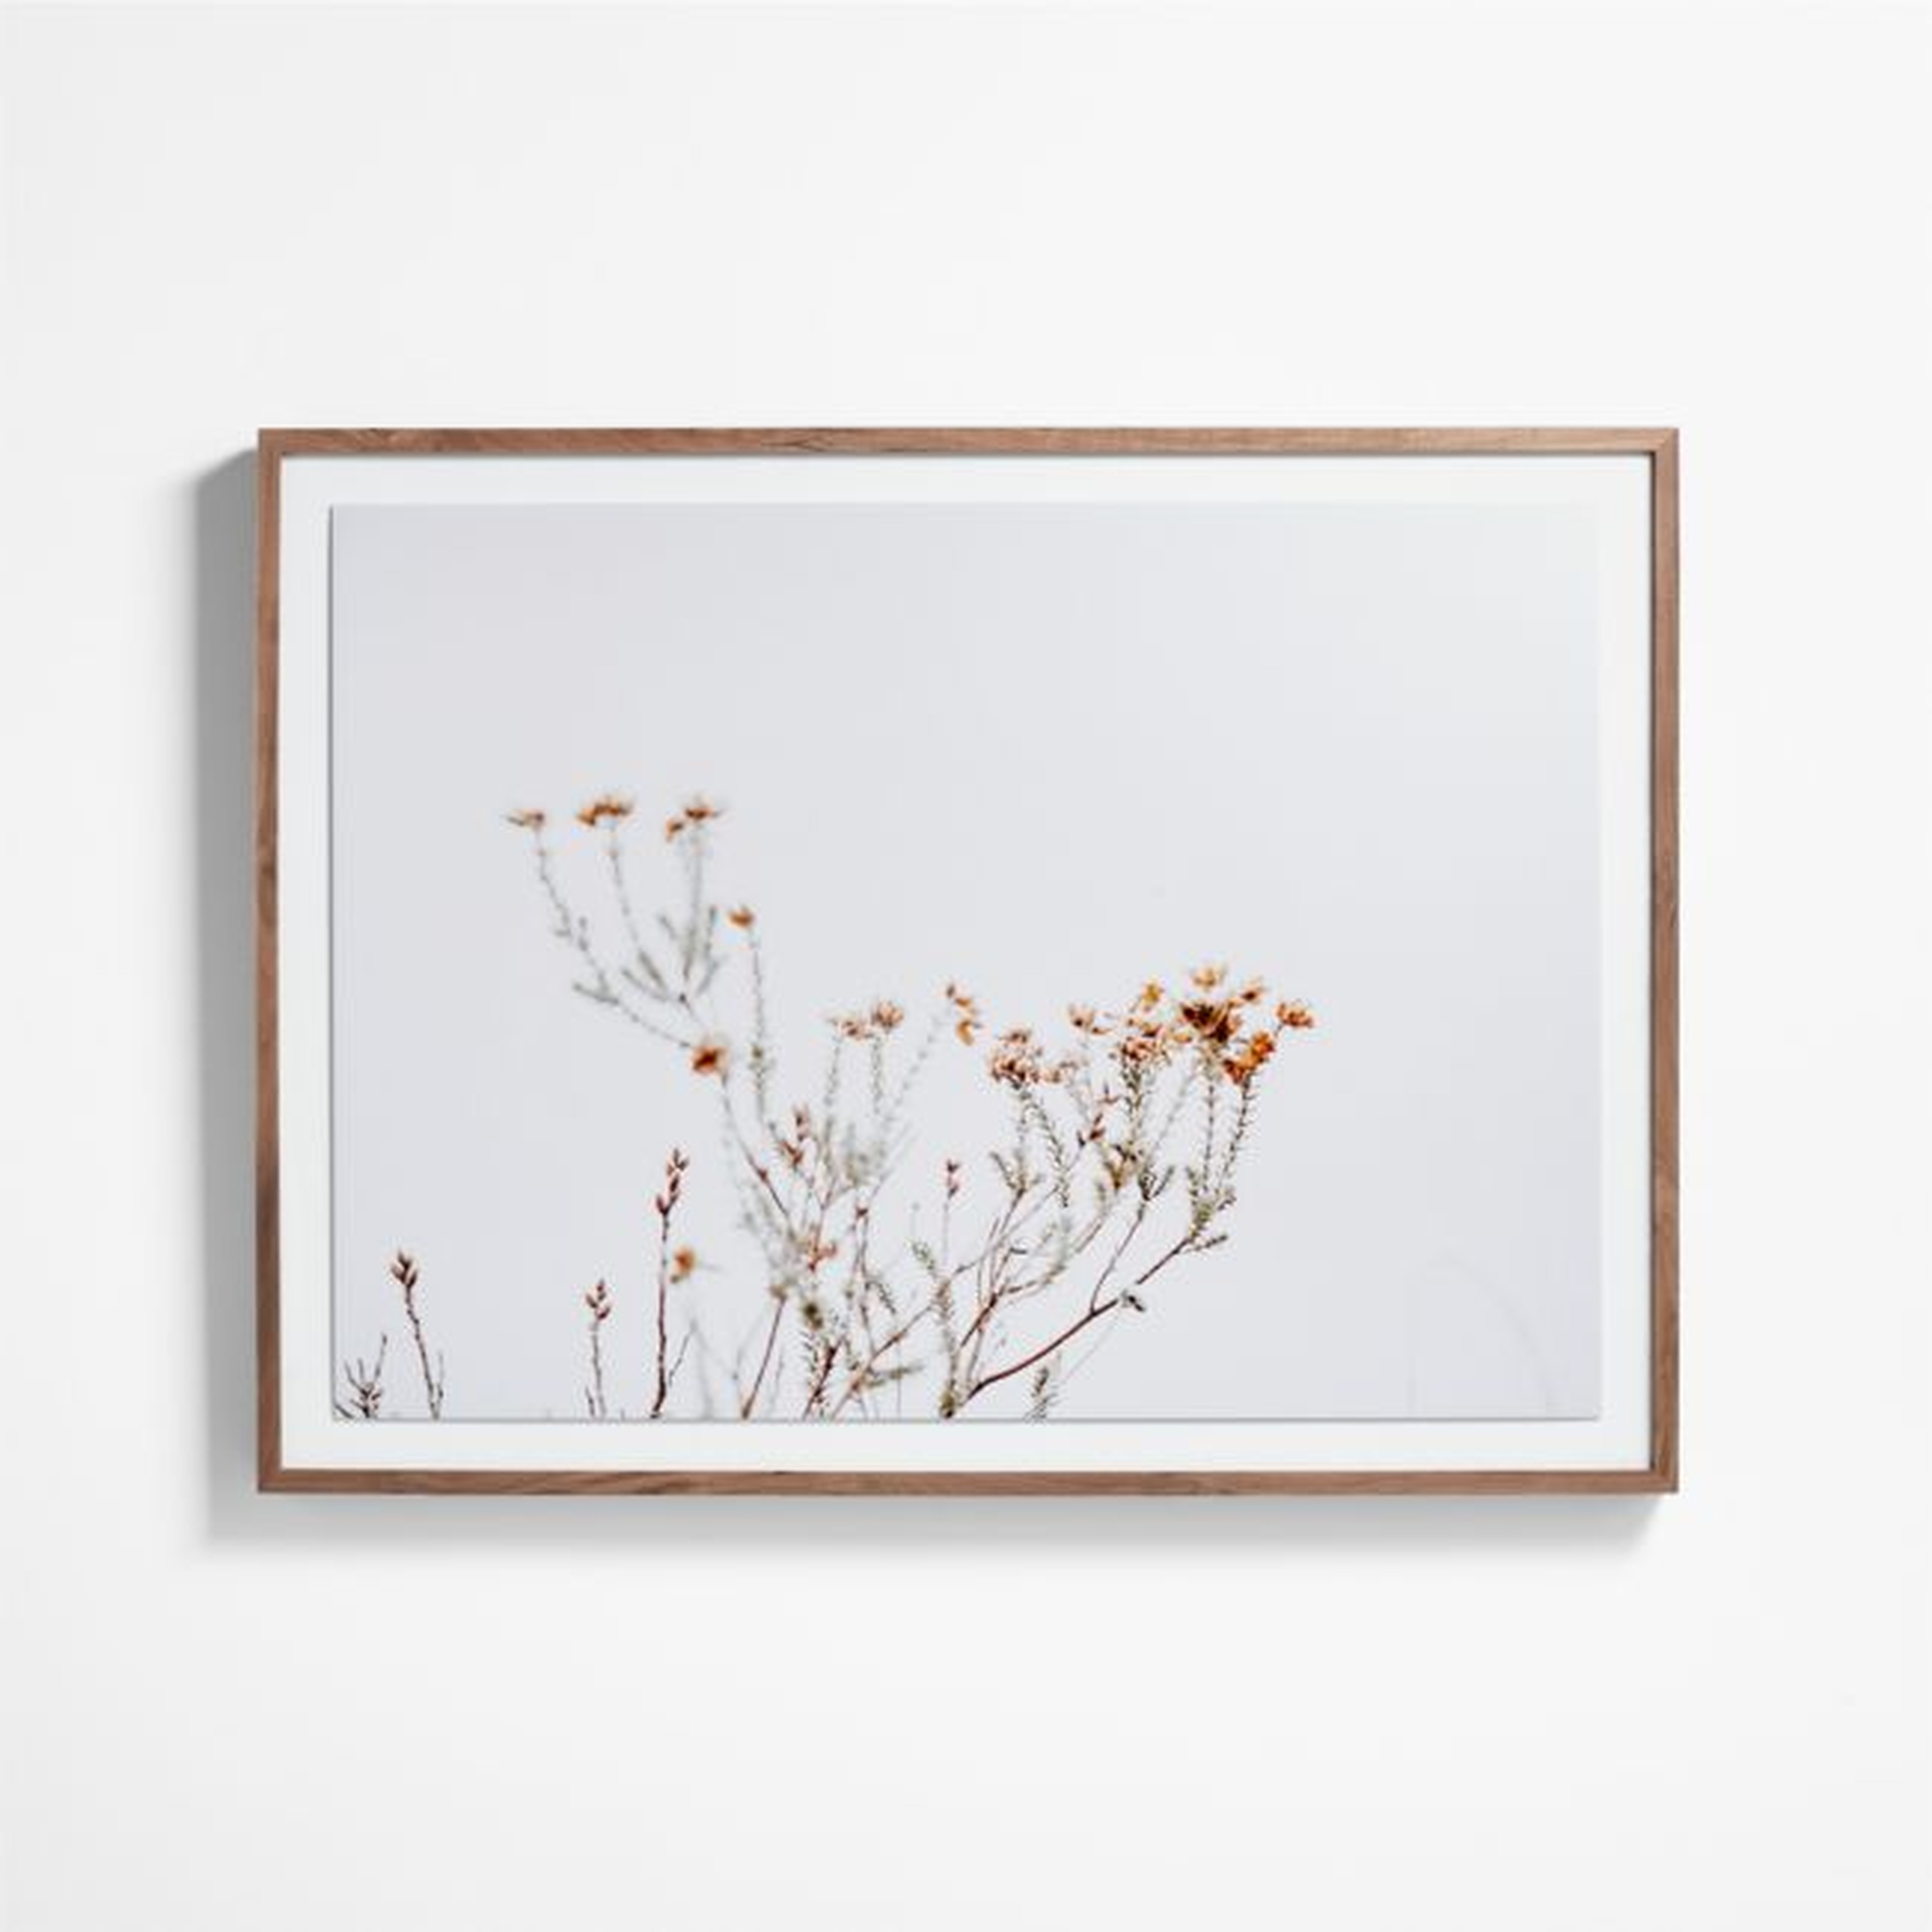 'In The Details' Framed Photographic Paper Wall Art Print 48"x36" by Annie Spratt - Crate and Barrel